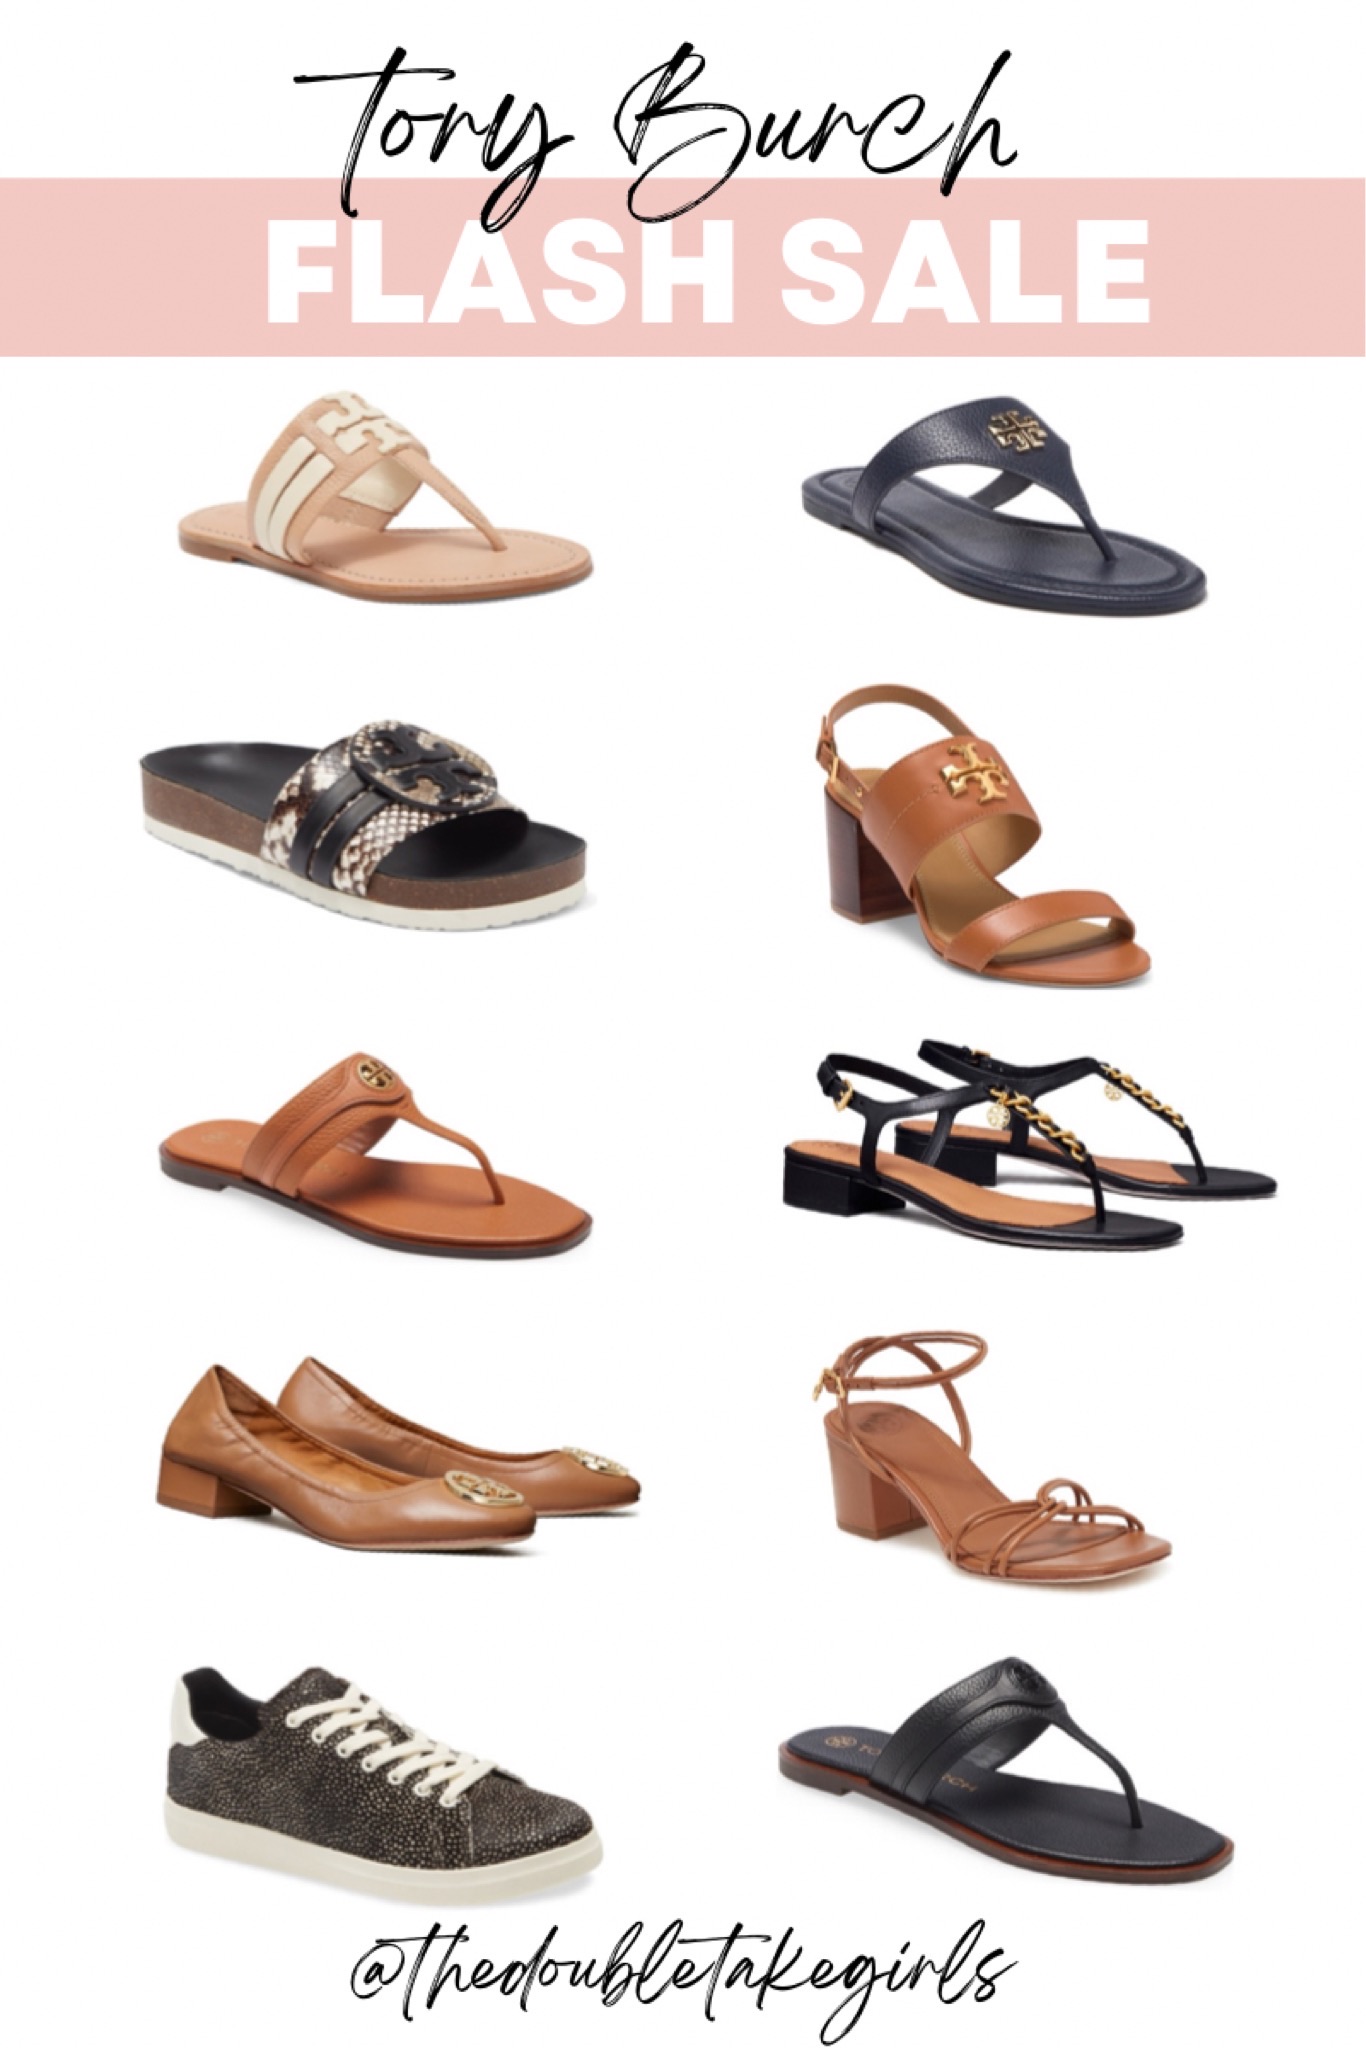 Tory Burch Flash Sale! Up To 60% Off + FREE Shipping! - The Double Take ...